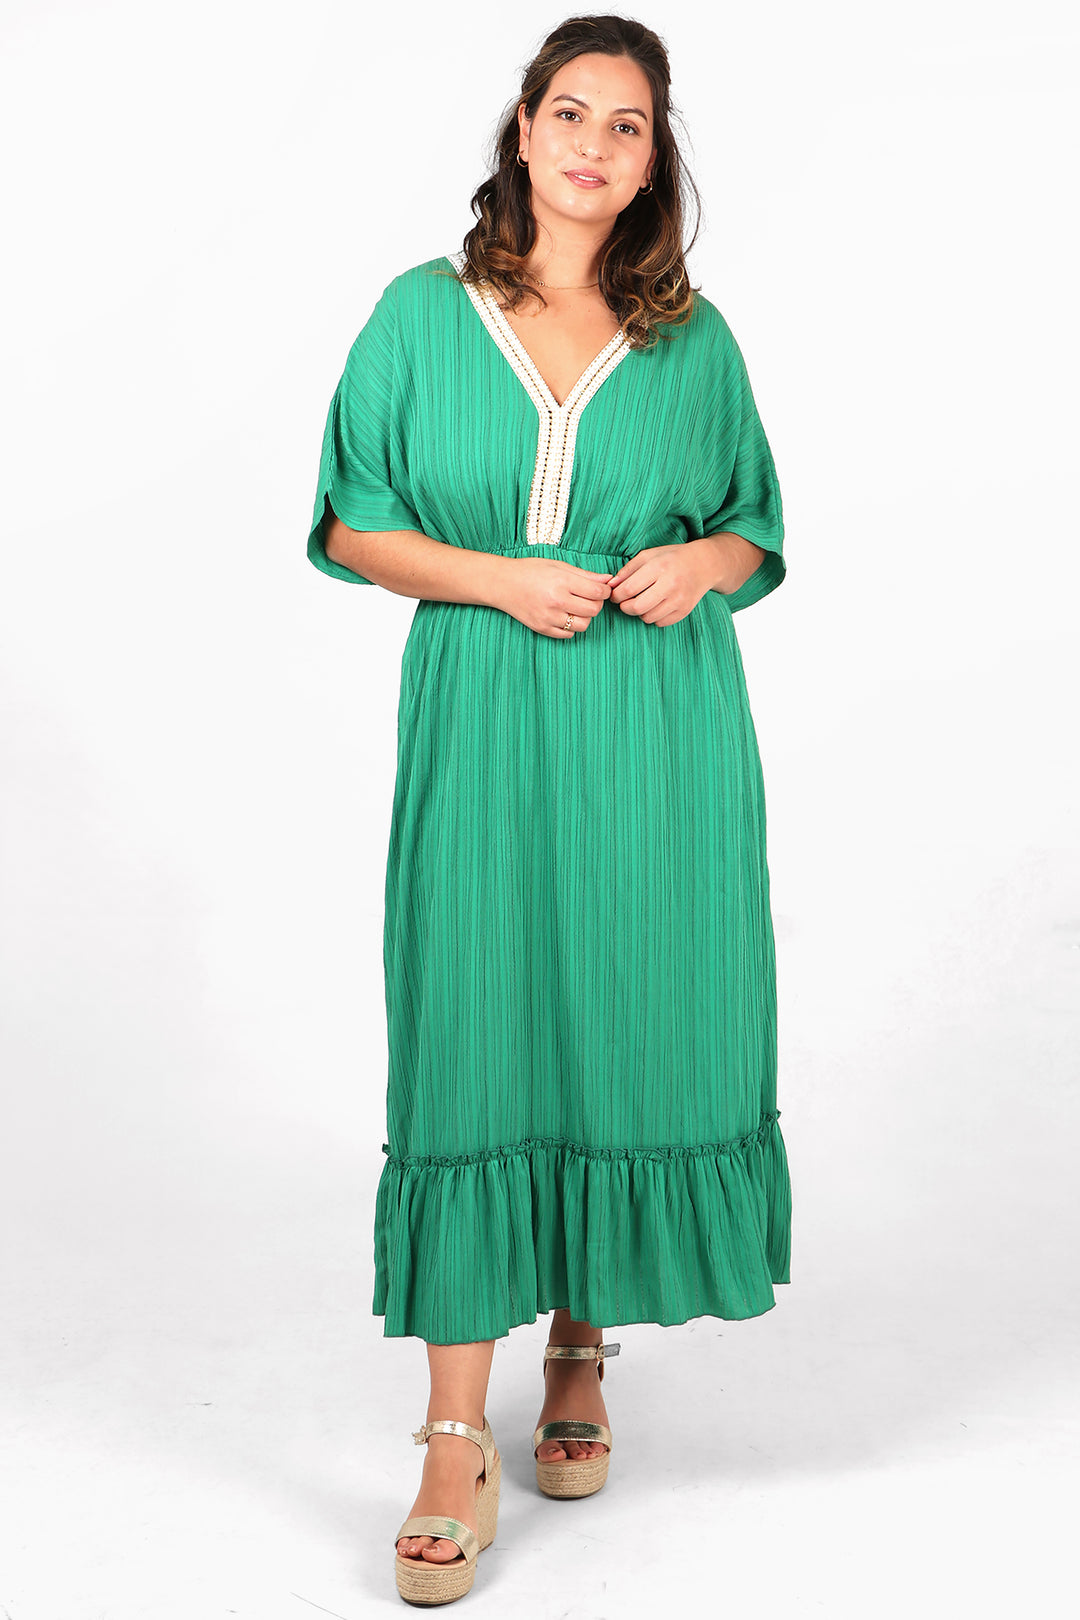 model wearing a midi length 3/4 sleeve green dress with a v neck, there is white and gold robe trim around the v neck